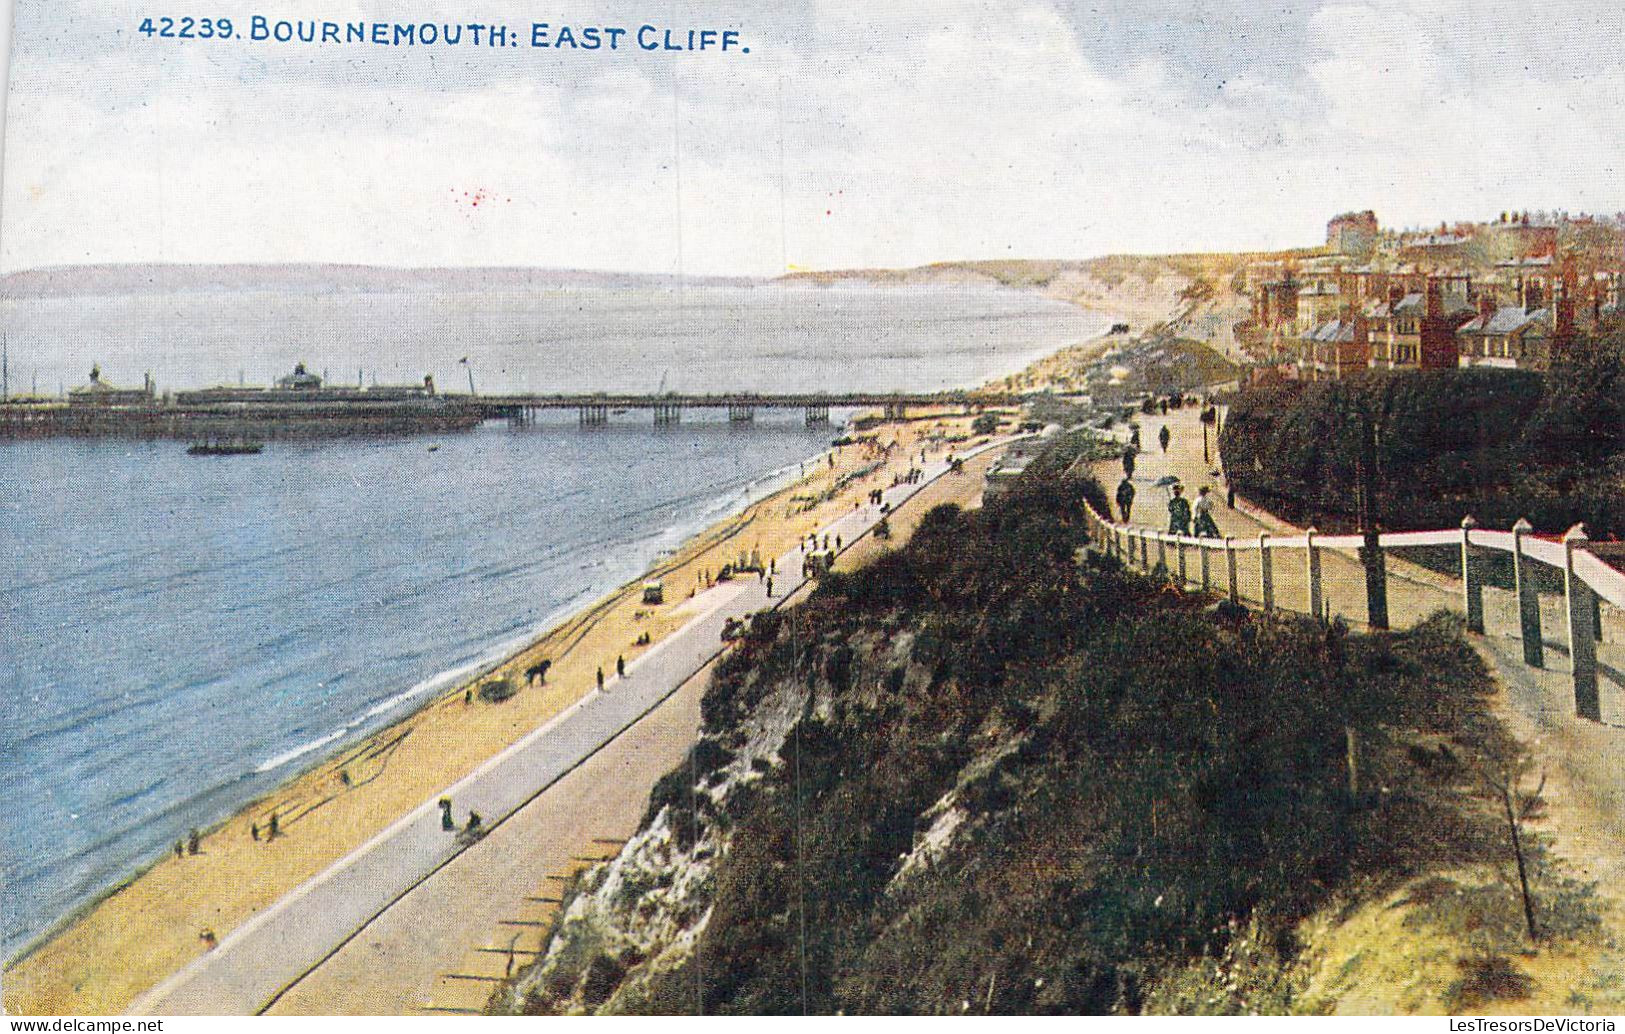 ANGLETERRE - Bournemouth - East Cliff - Carte Postale Ancienne - Bournemouth (vanaf 1972)